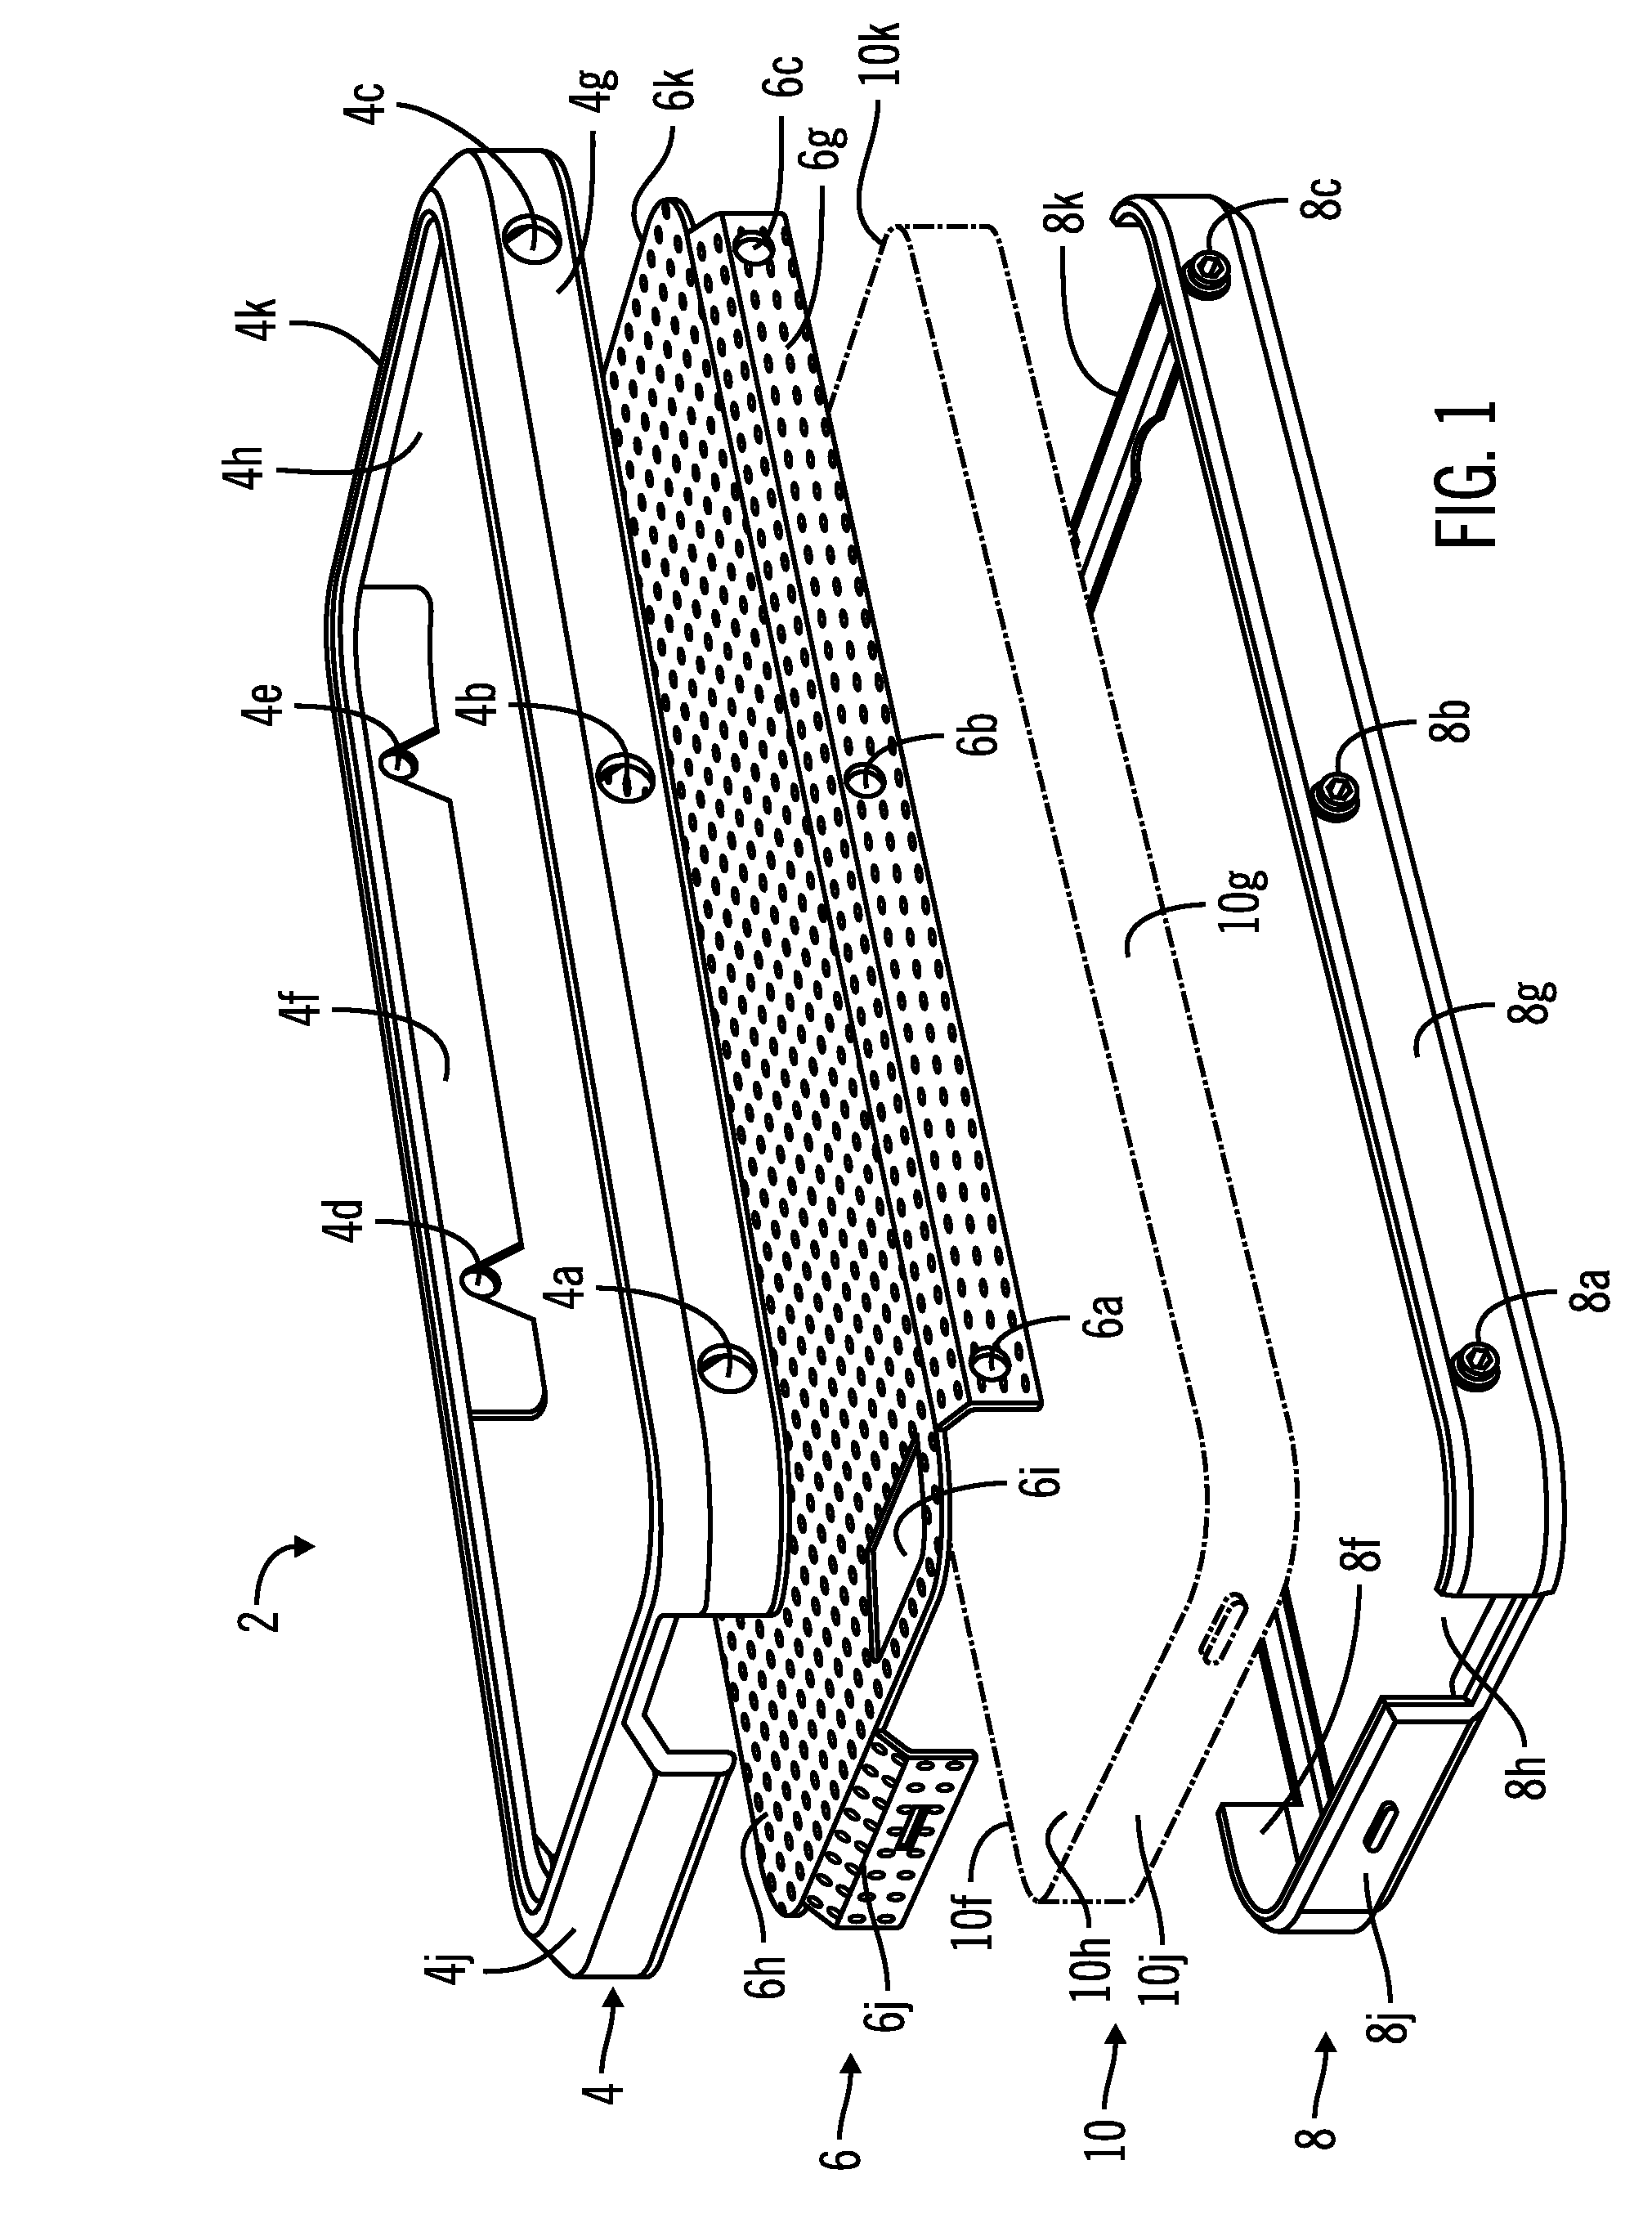 Case for a portable electronic device having rims and a material